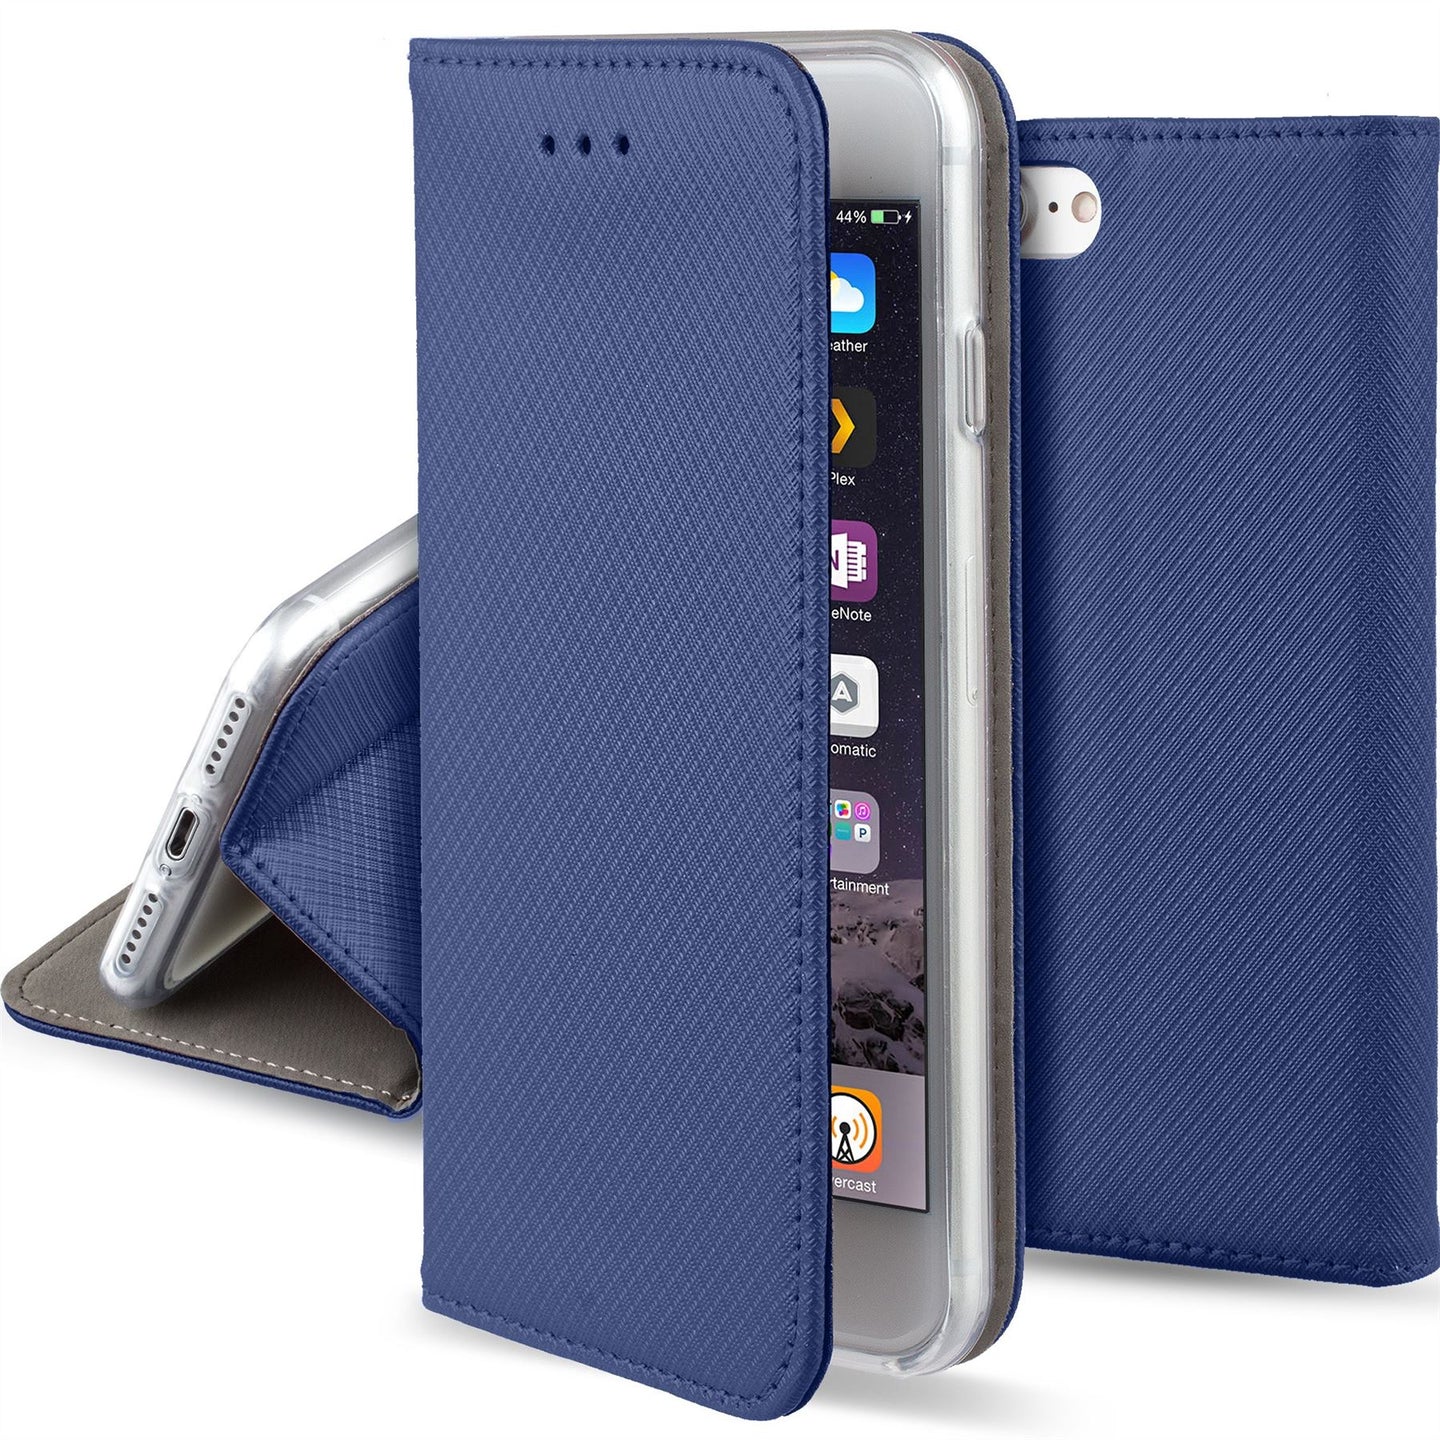 Moozy Case Flip Cover for iPhone 6s, iPhone 6, Dark Blue - Smart Magnetic Flip Case with Card Holder and Stand